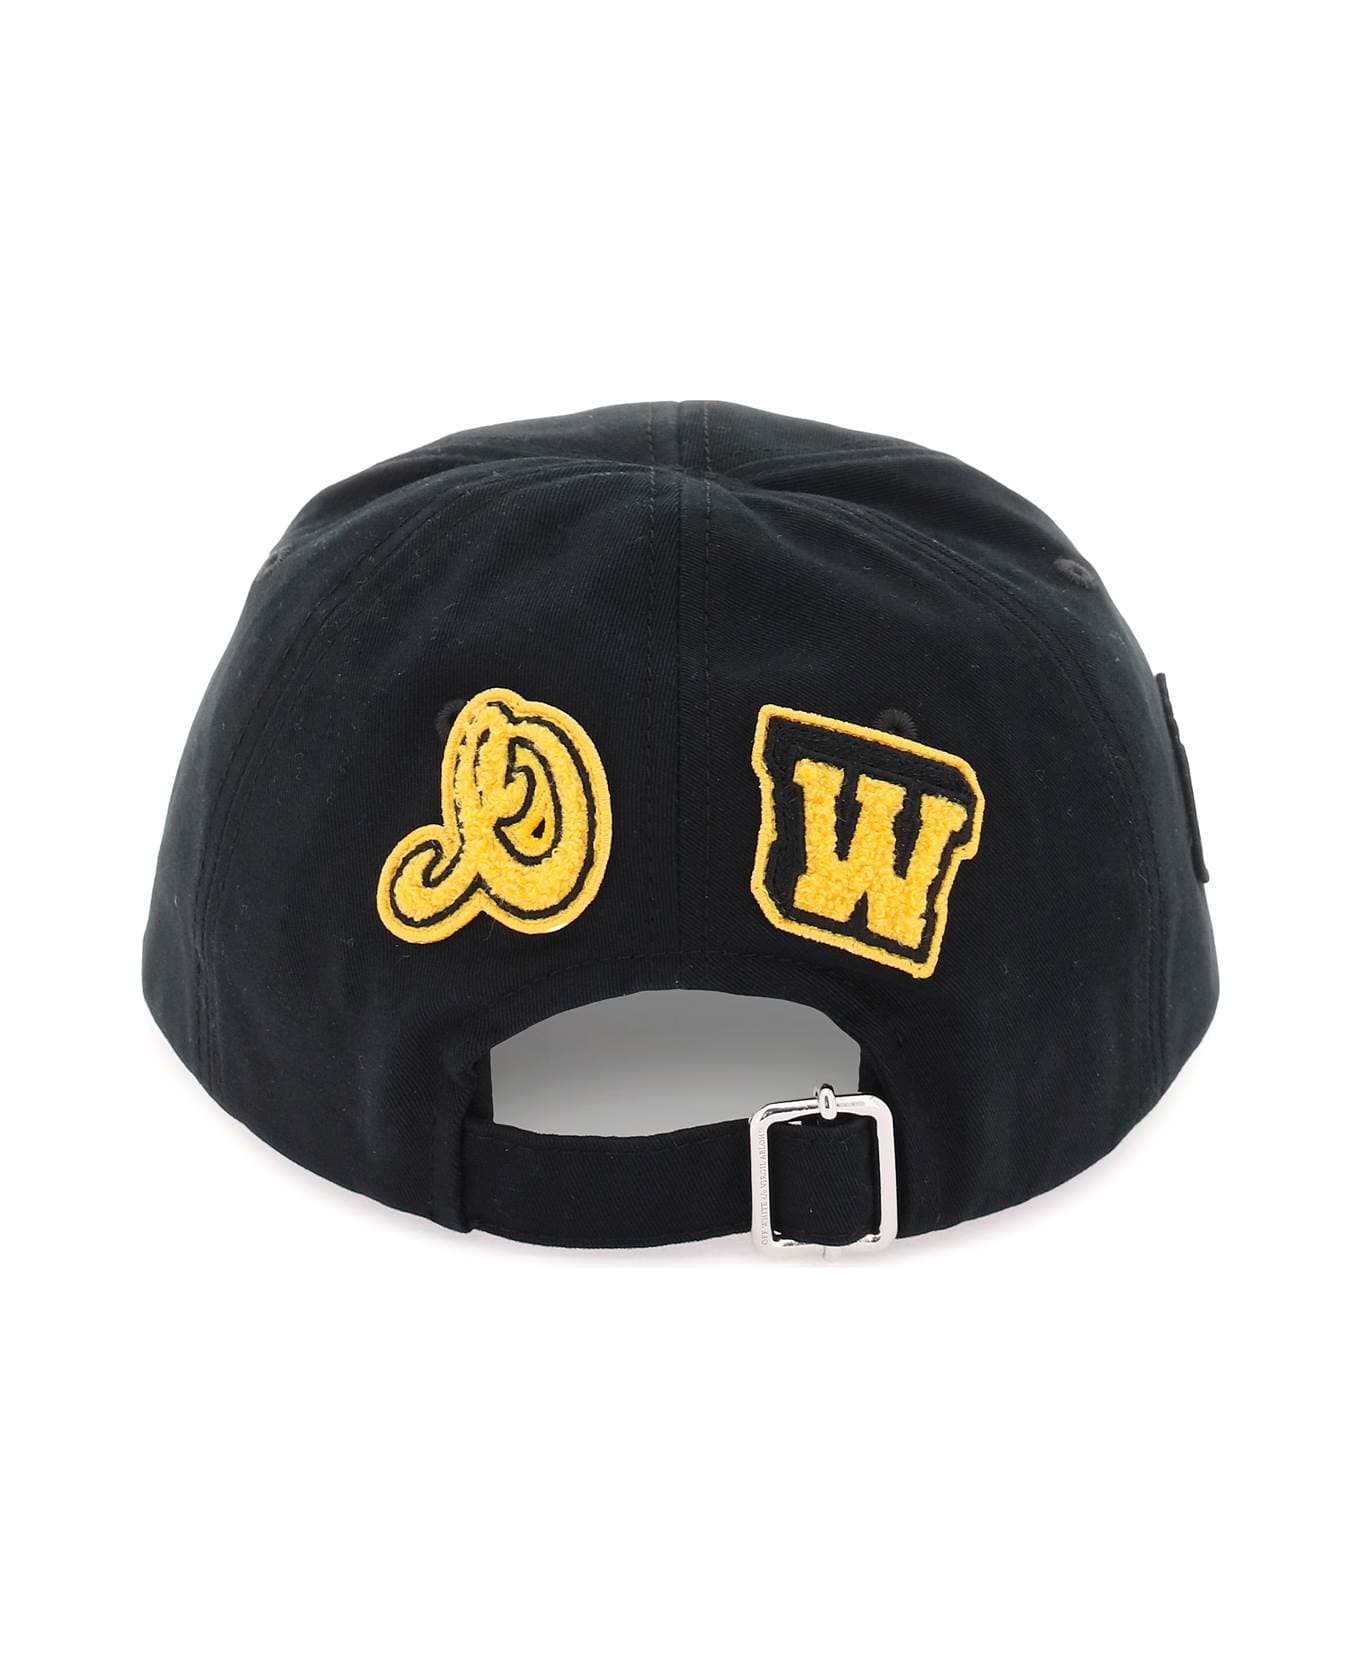 Off-White Baseball Cap With Patch - BLACK YELLOW (Black)